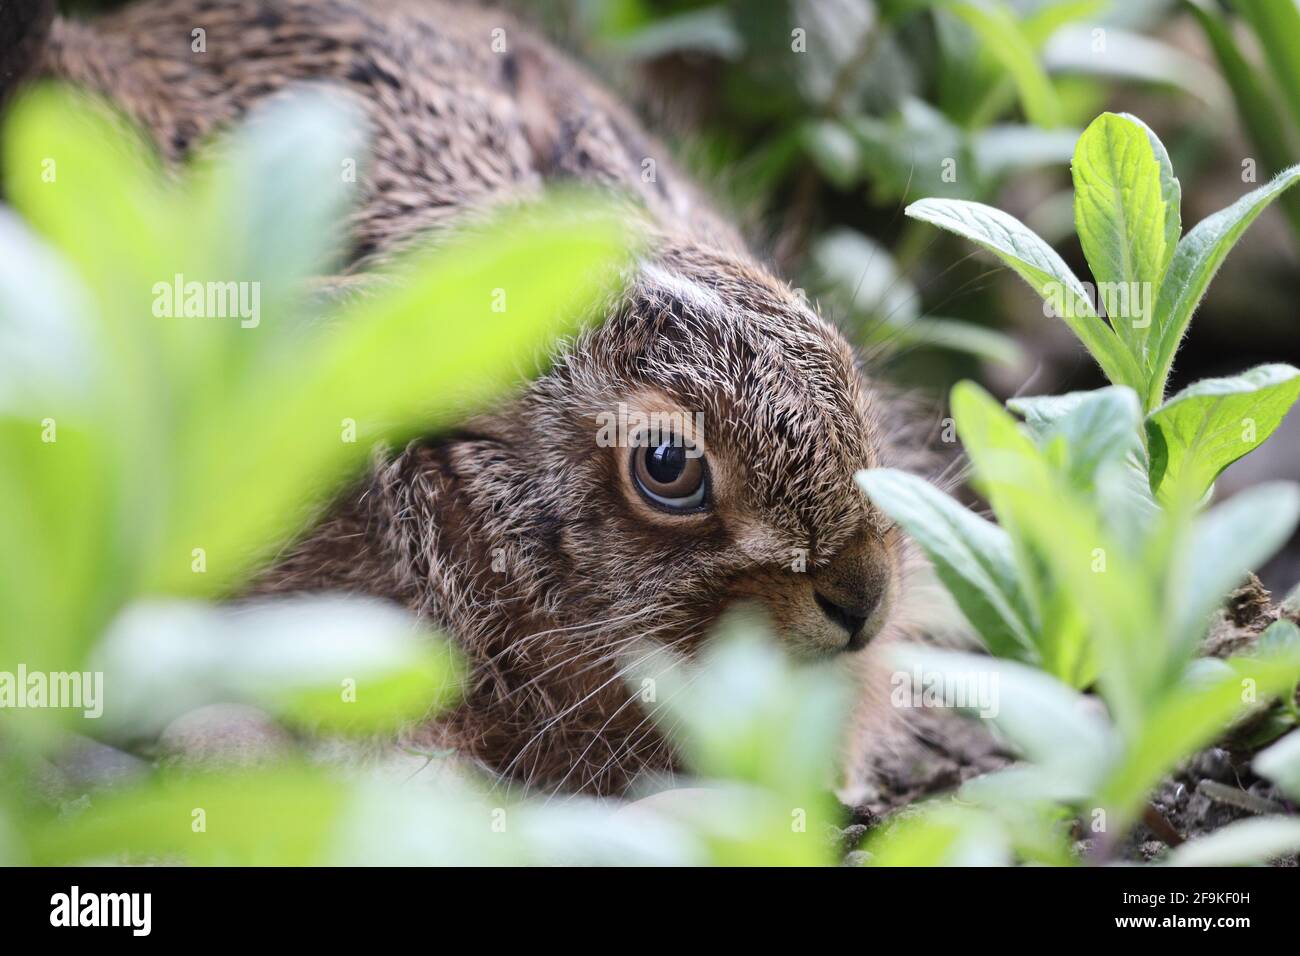 A Young Brown Hare Leveret (Lepus capensis) Hiding among Vivid Green Plants in a Garden Environment, Teesdale, UK Stock Photo